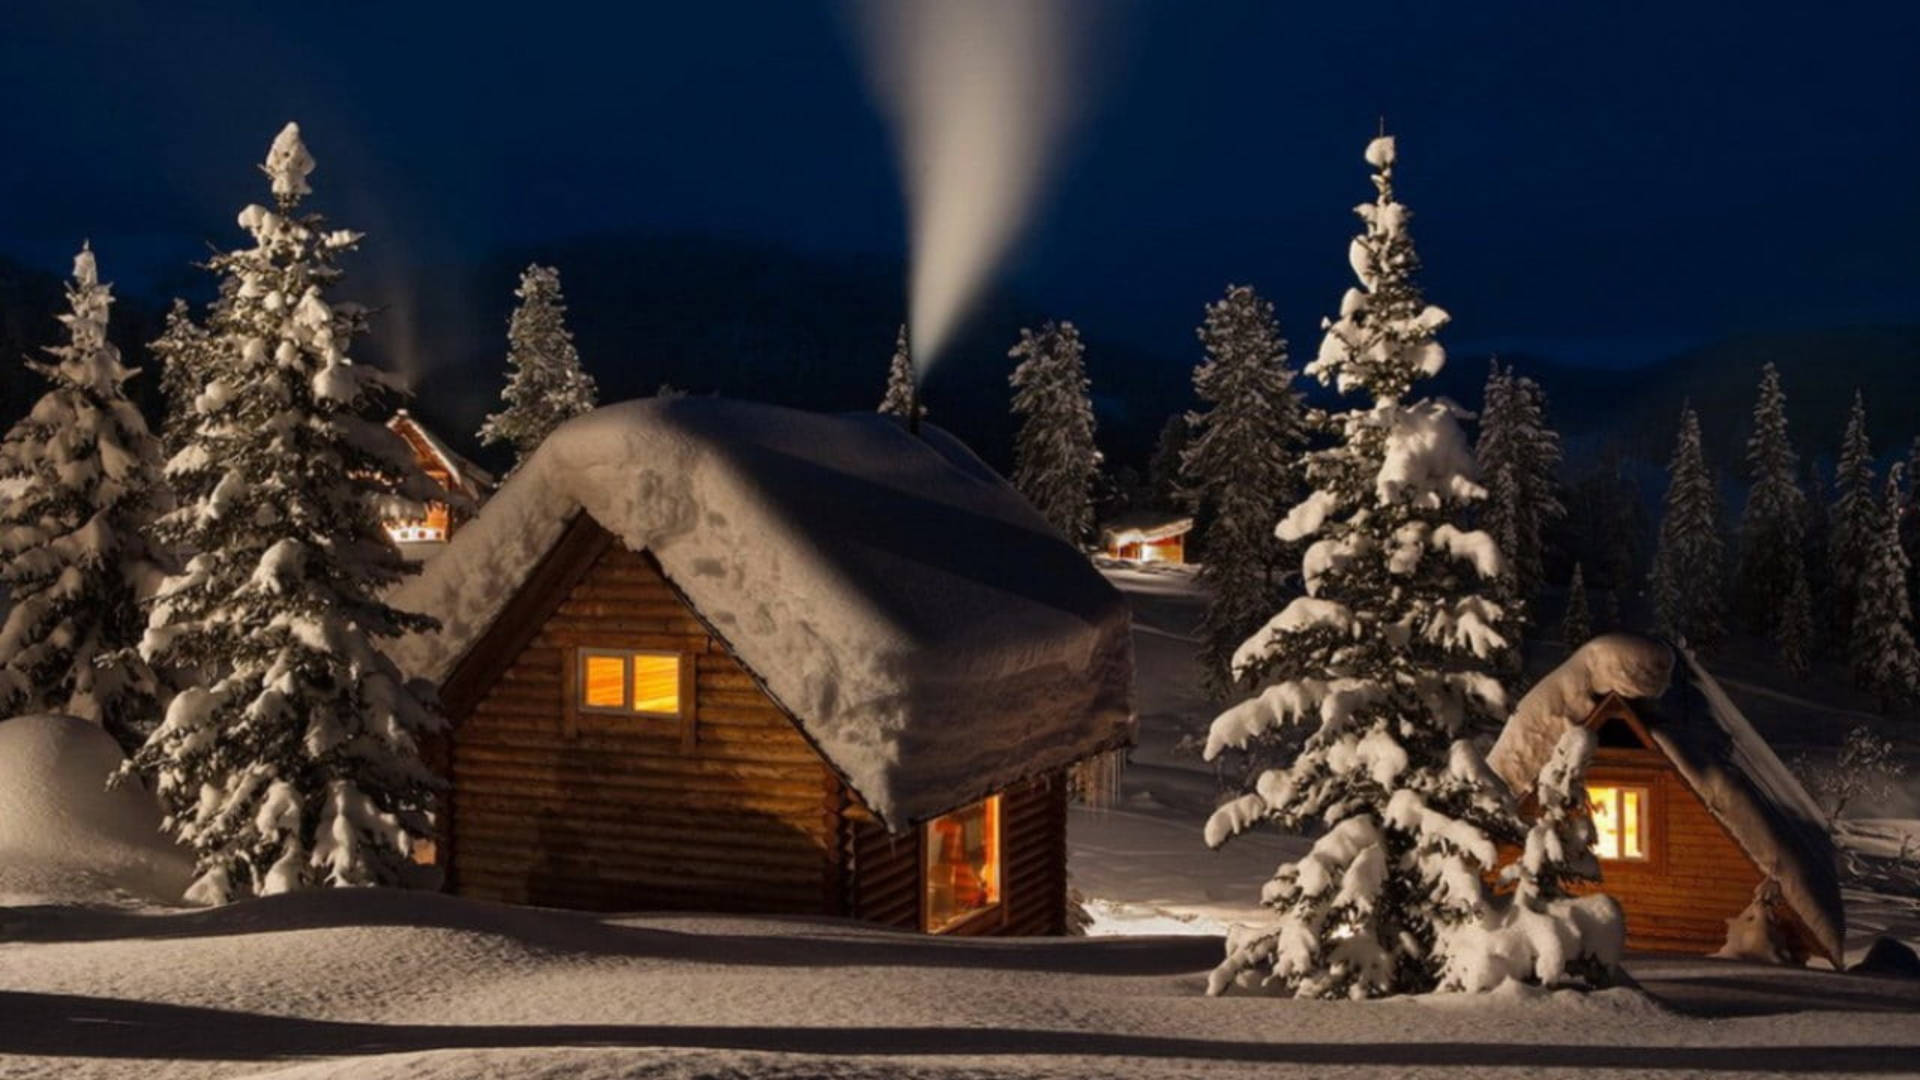 Cozy Winter Cabins On A Snowy Evening Wallpaper